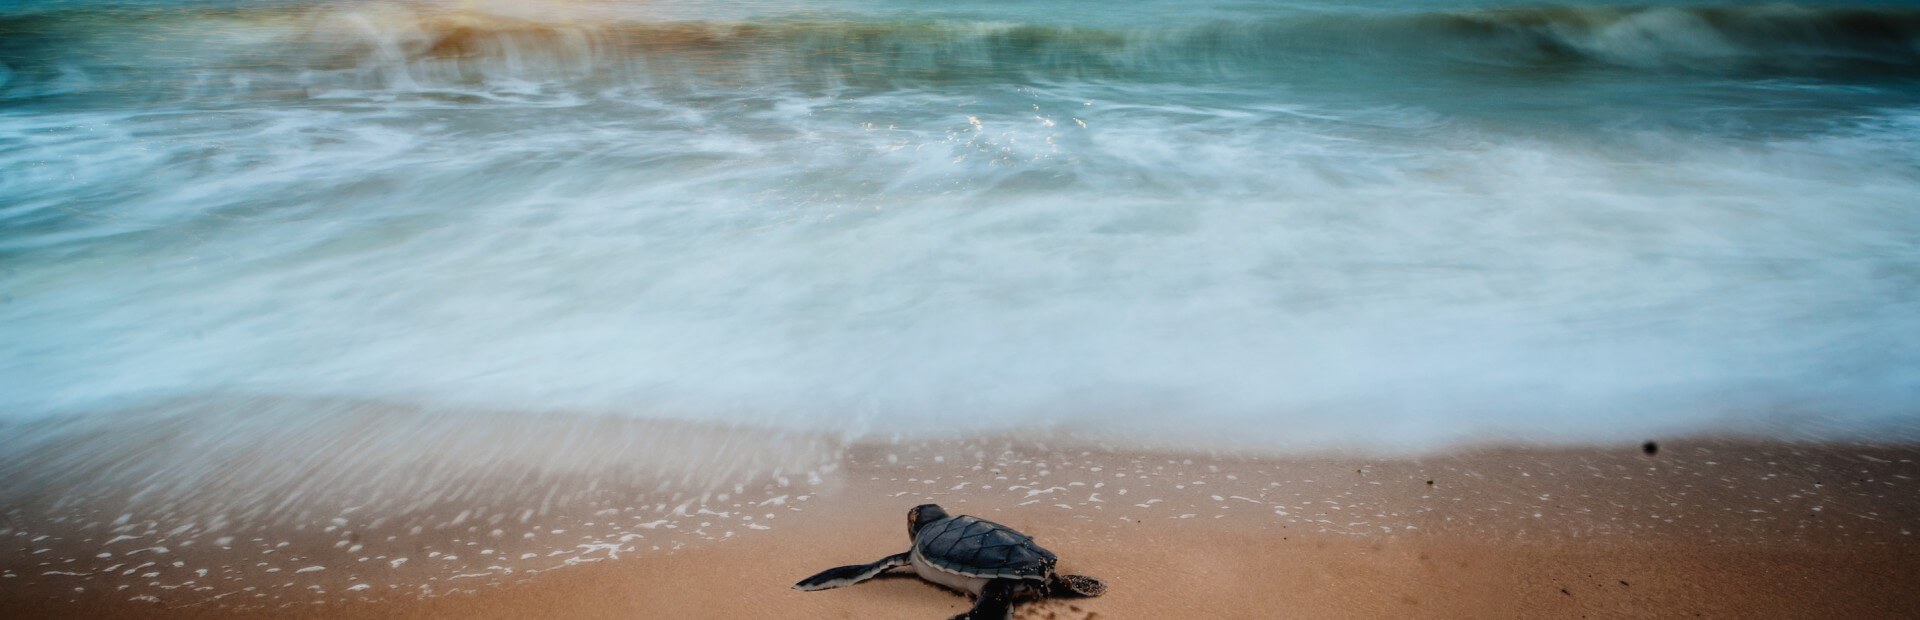 Turtles season in Cabo, nesting, hatching and release